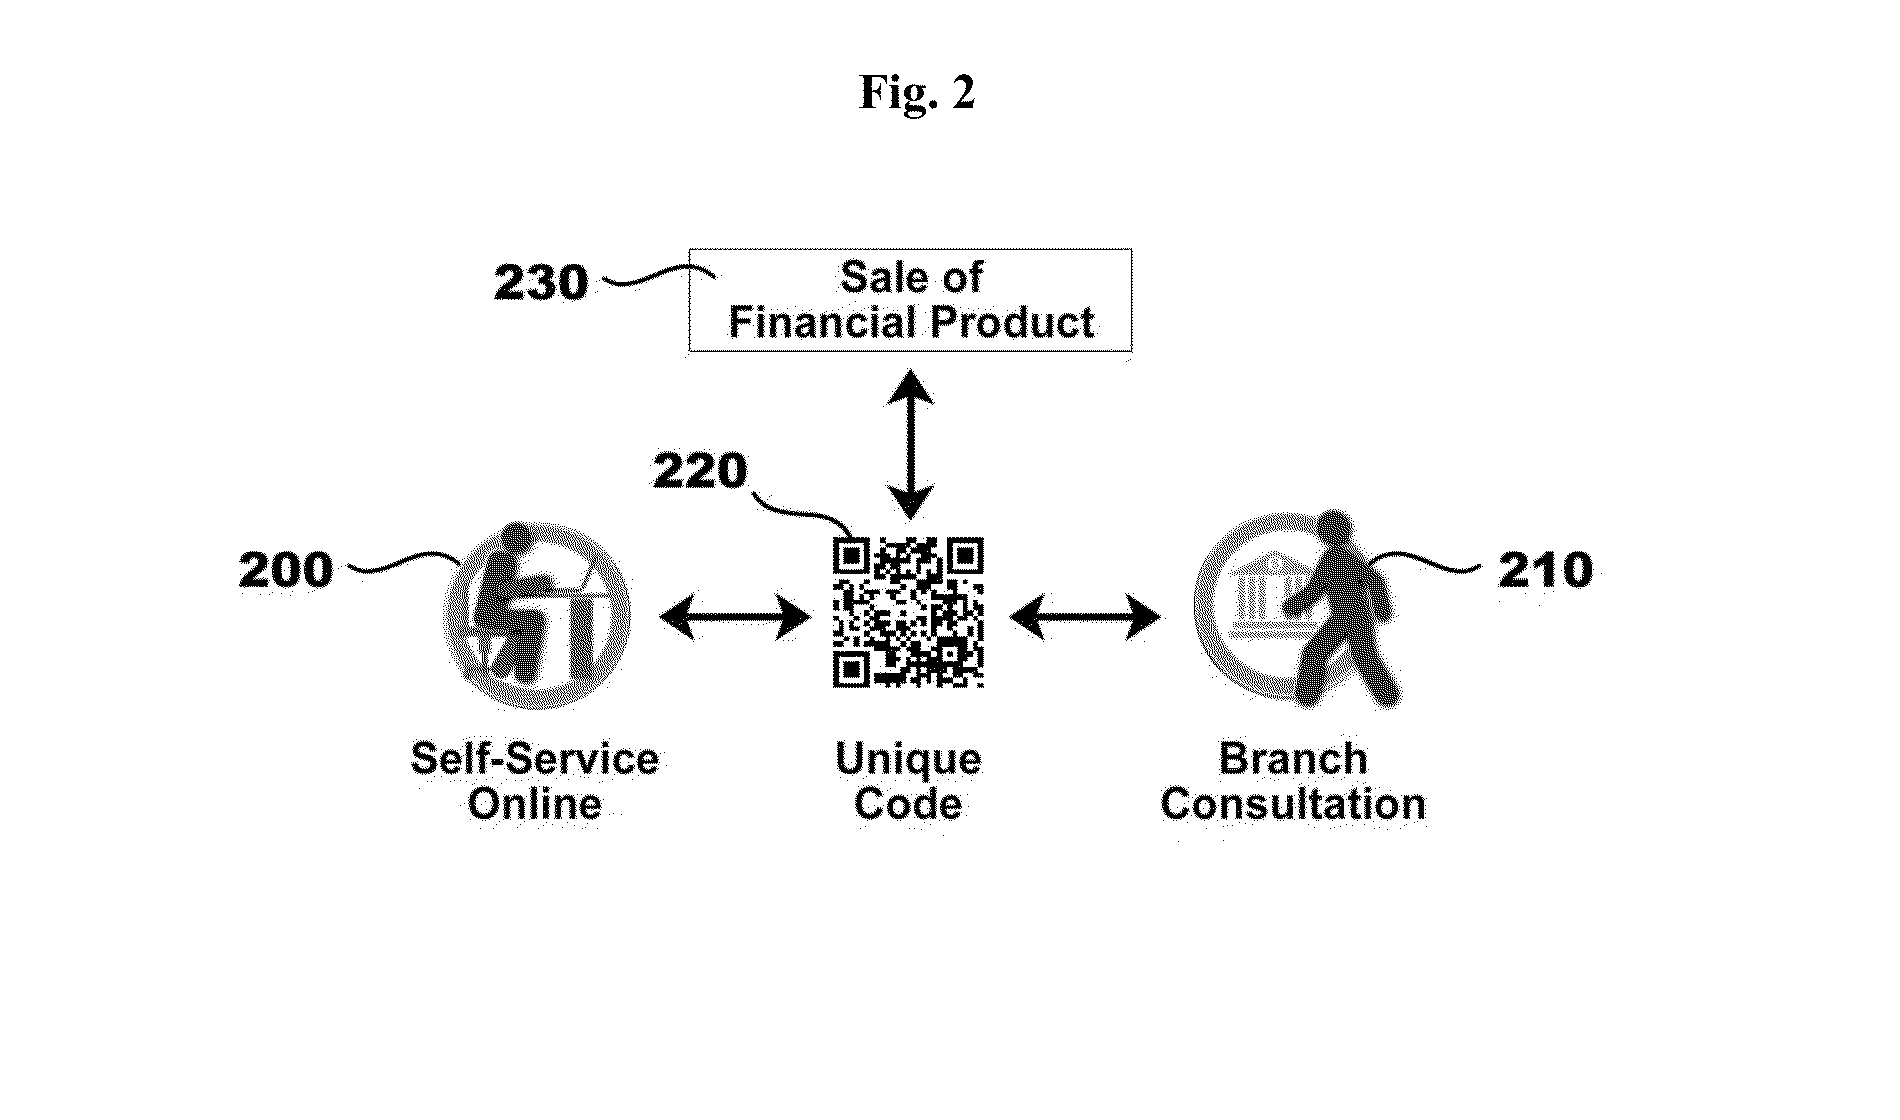 Bimodal computer-based system for selling financial products